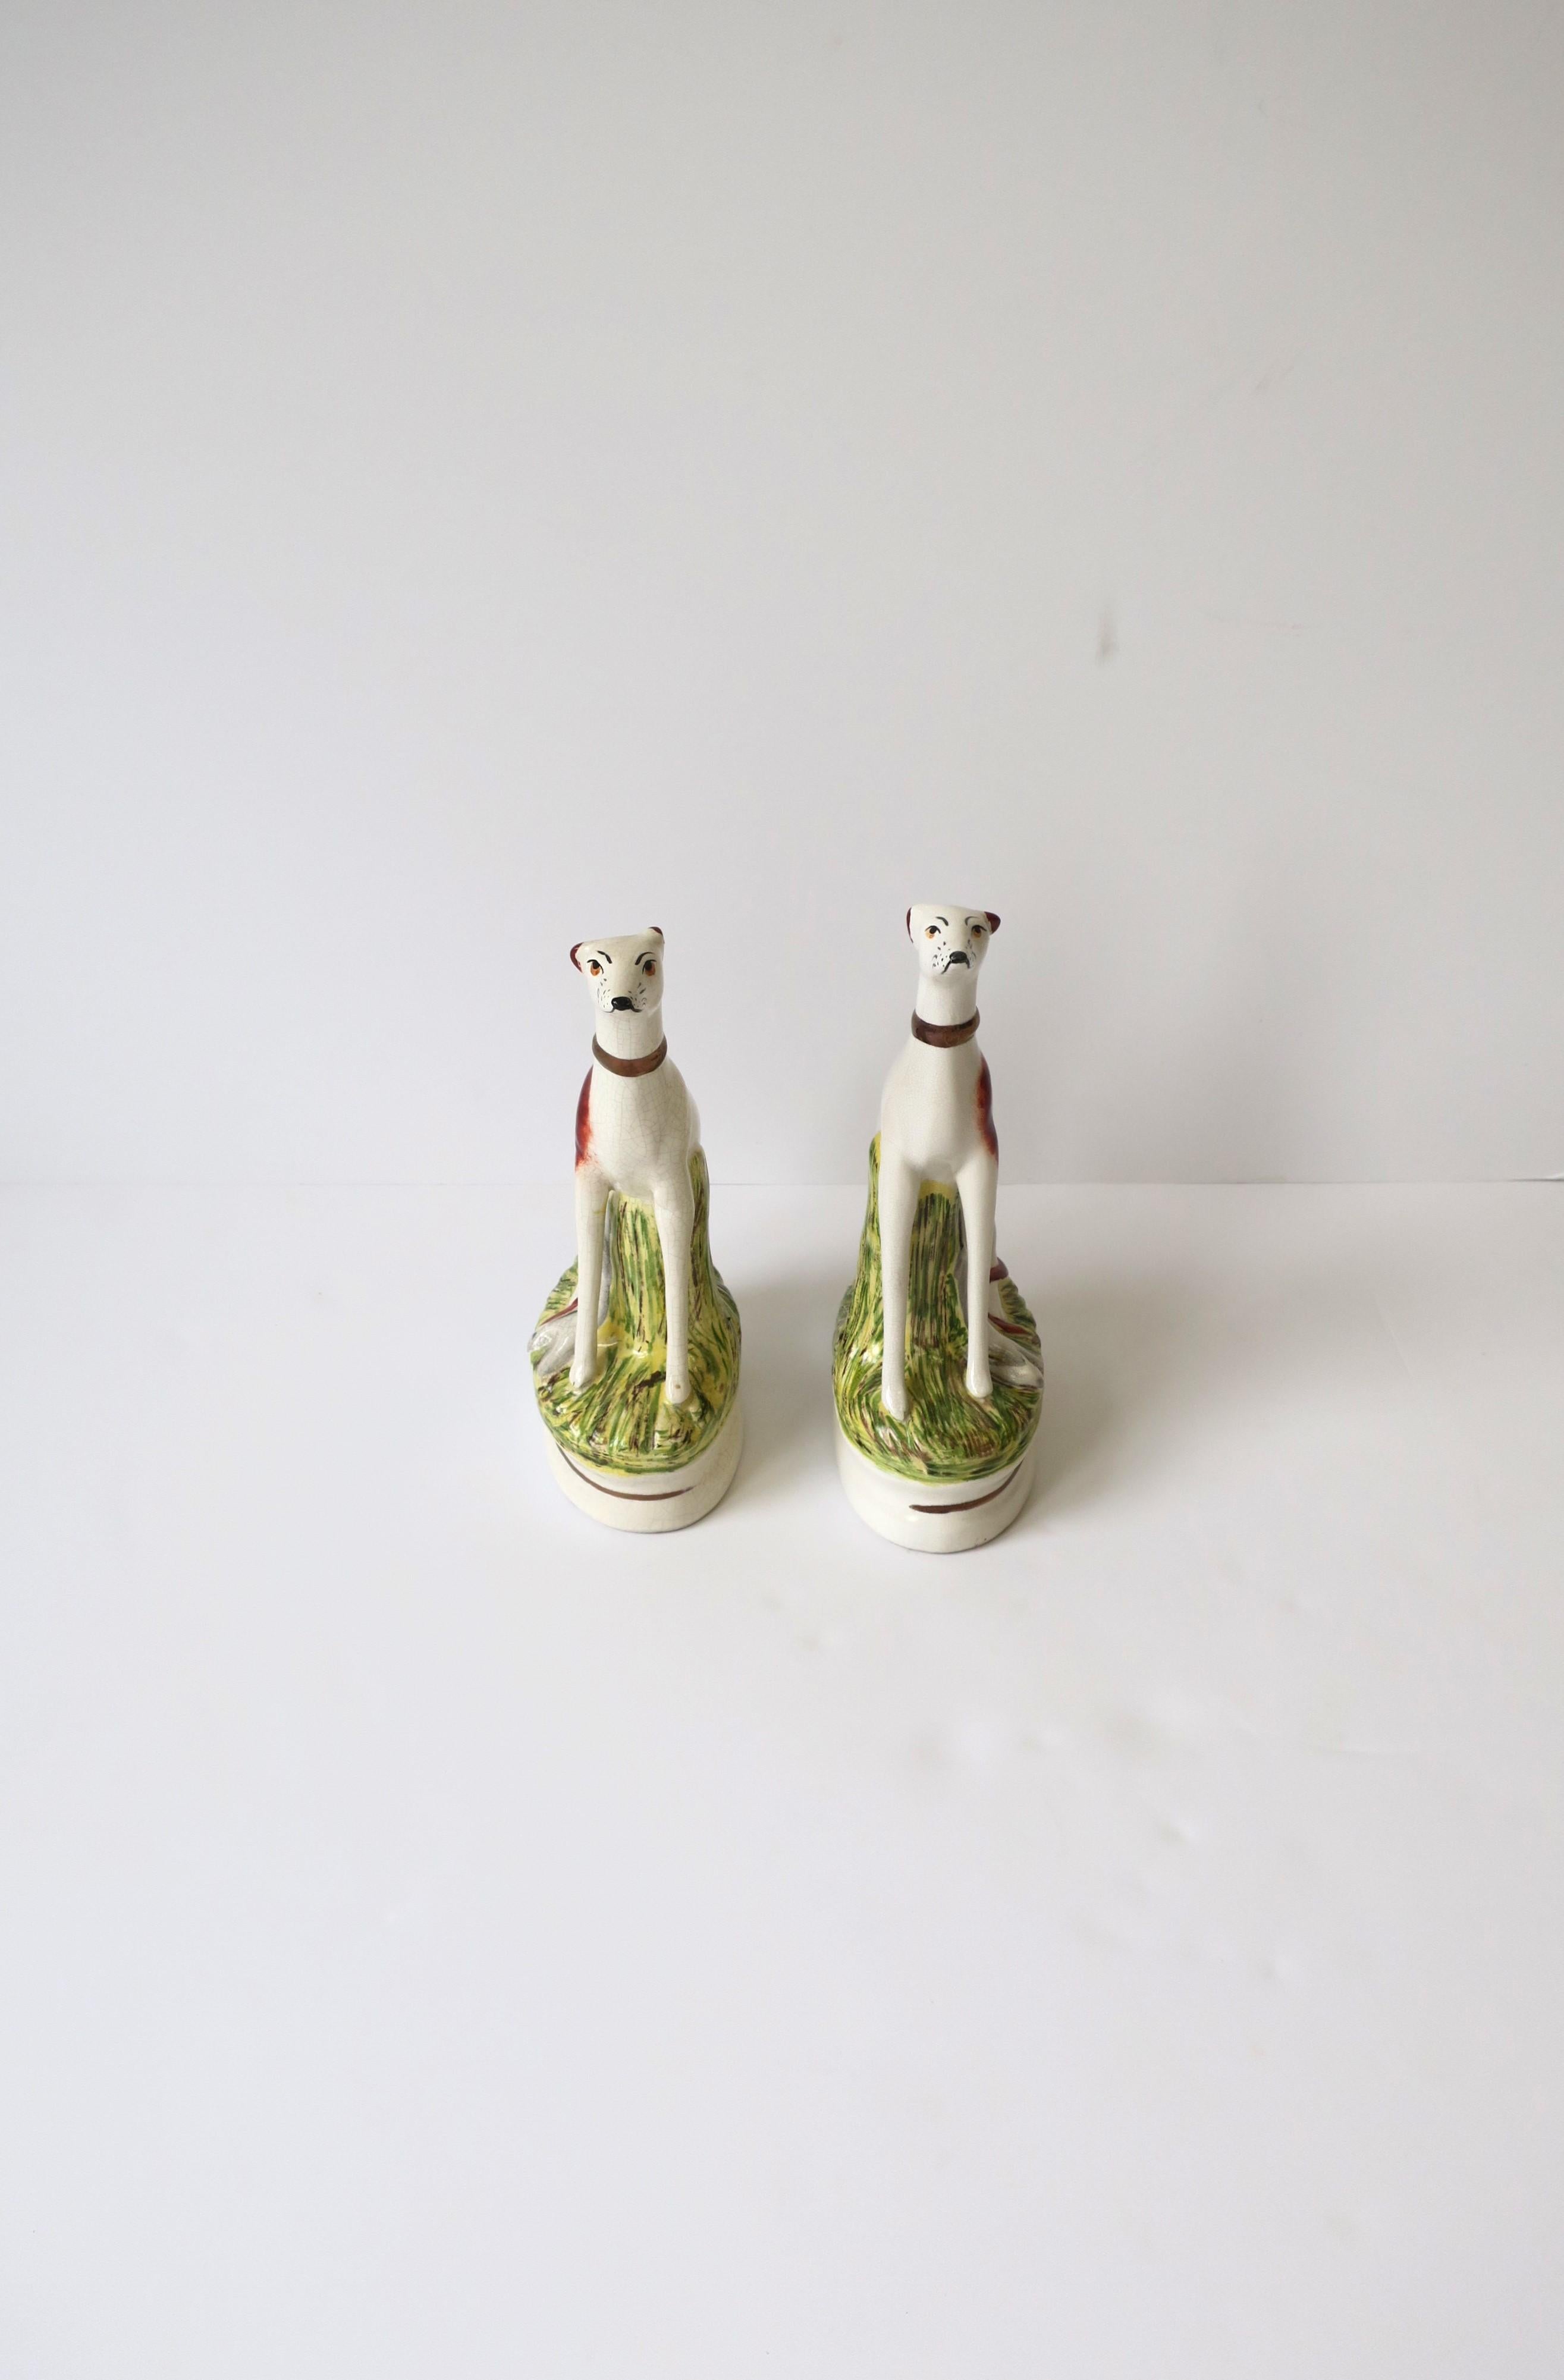 English Staffordshire Dogs Bookends or Decorative Objects, Pair 2